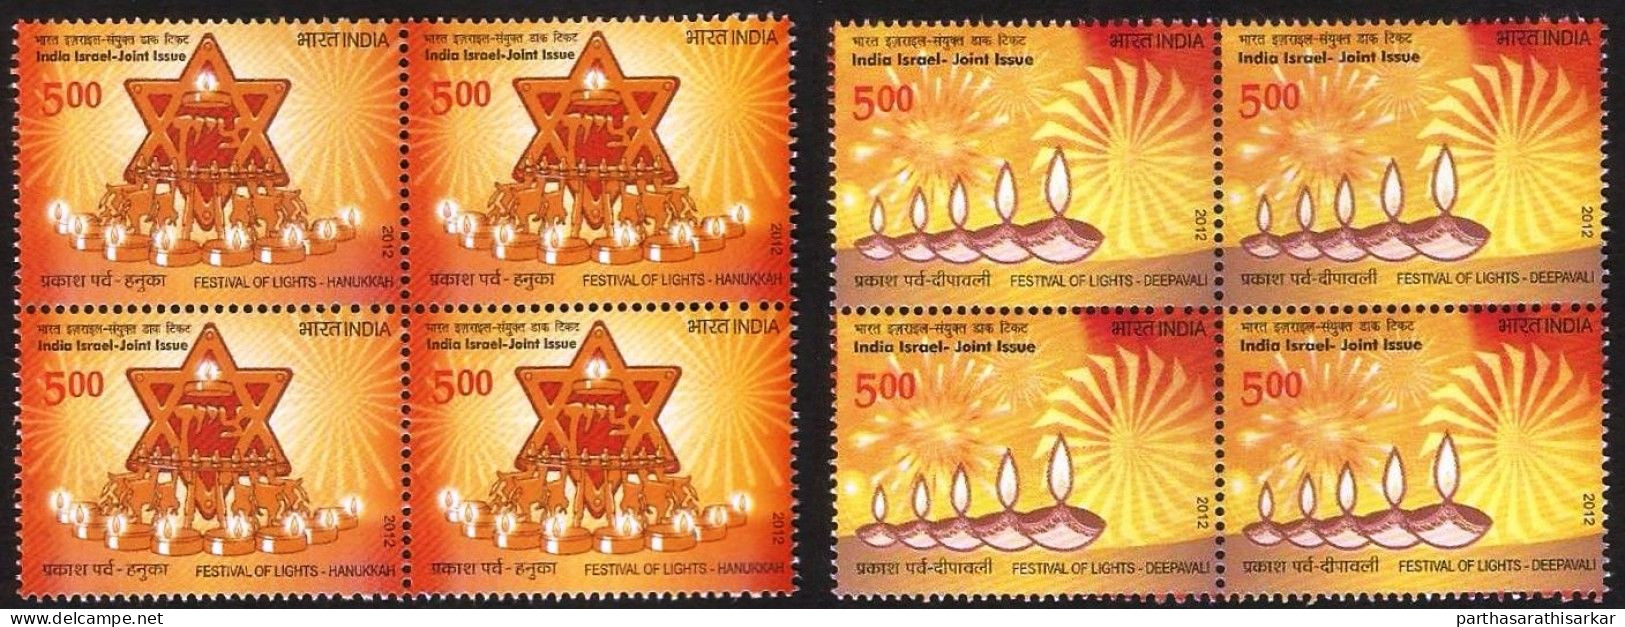 INDIA 2012 FESTIVAL OF LIGHTS JOINT ISSUE WITH ISRAEL COMPLETE SET BLOCK OF 4 MNH RARE - Unused Stamps